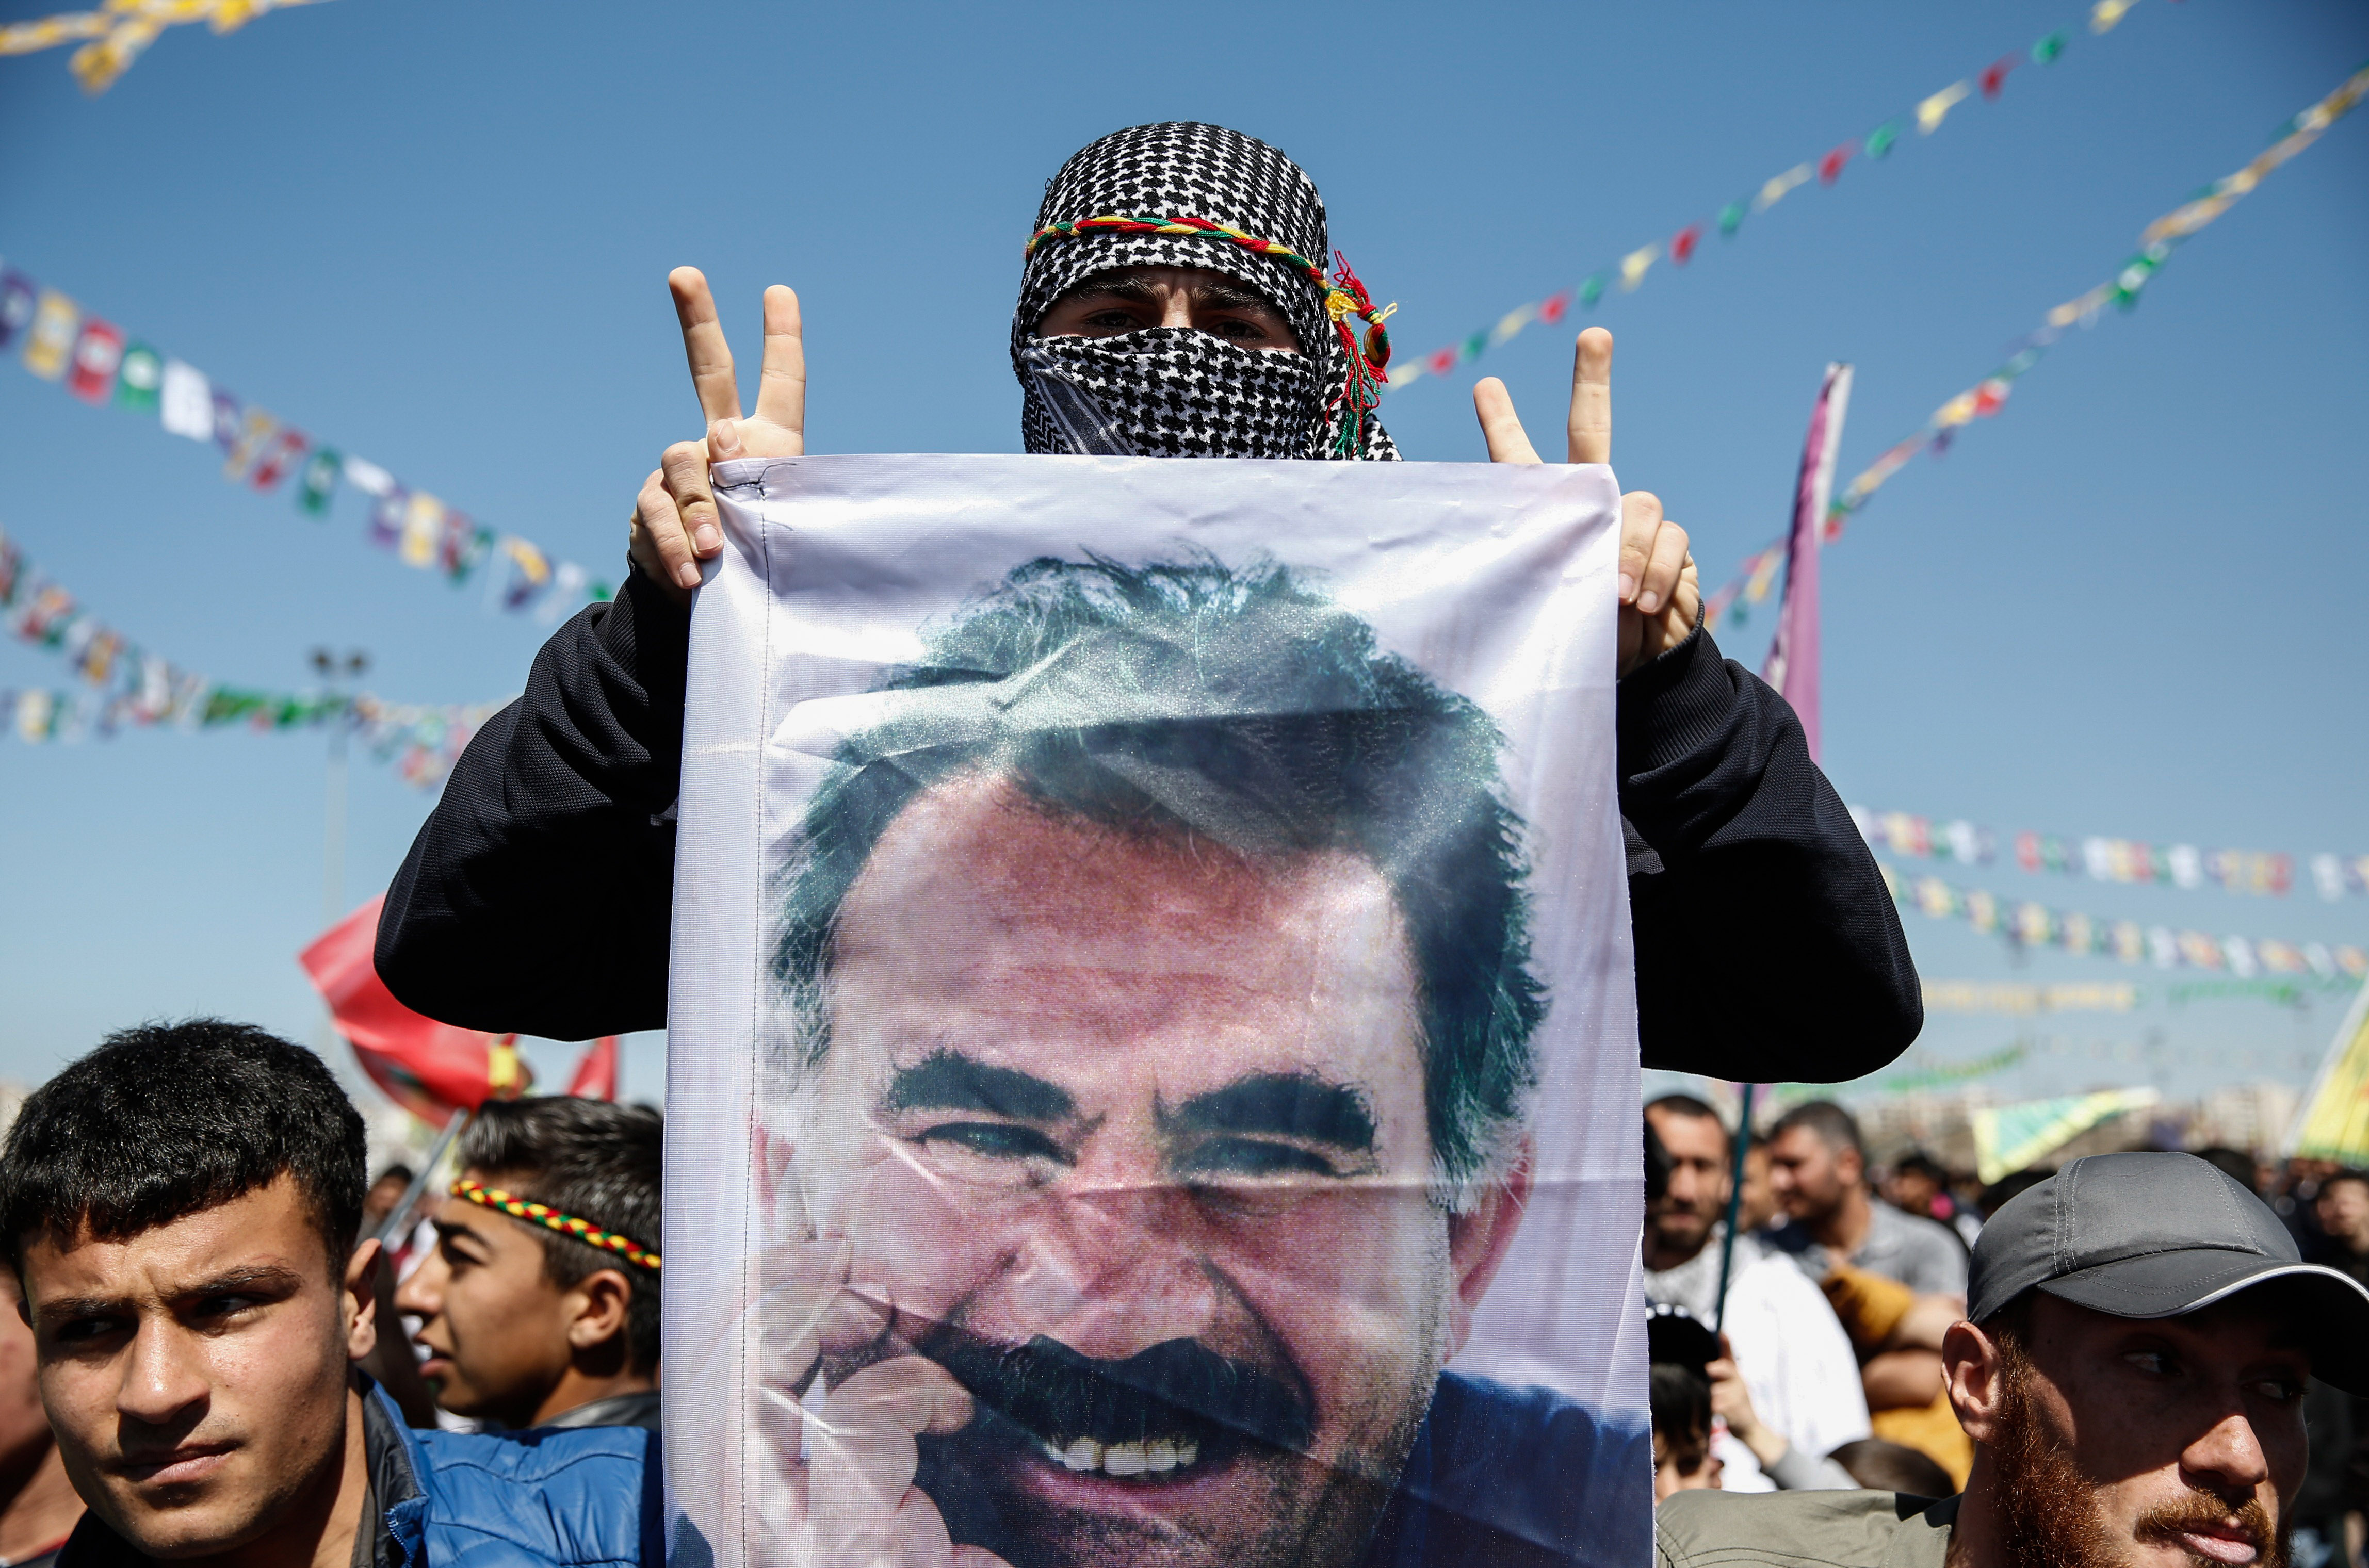 A Kurdish man flashes a v-sign as he holdsup a flag with a picture of the jailed PKK leader Abdullah Ocalan during Newroz celebrations, on March 21, 2015 in Diyarbakir, Turkey. Thousands of Kurds gather for the Newroz spring festival in Diyarbakir in southeast Turkey under tight security after months of fighting between security forces and Kurdish separatists, and a series of bombings in Istanbul and Ankara. (Photo by Ulas Tosun/Getty Images)